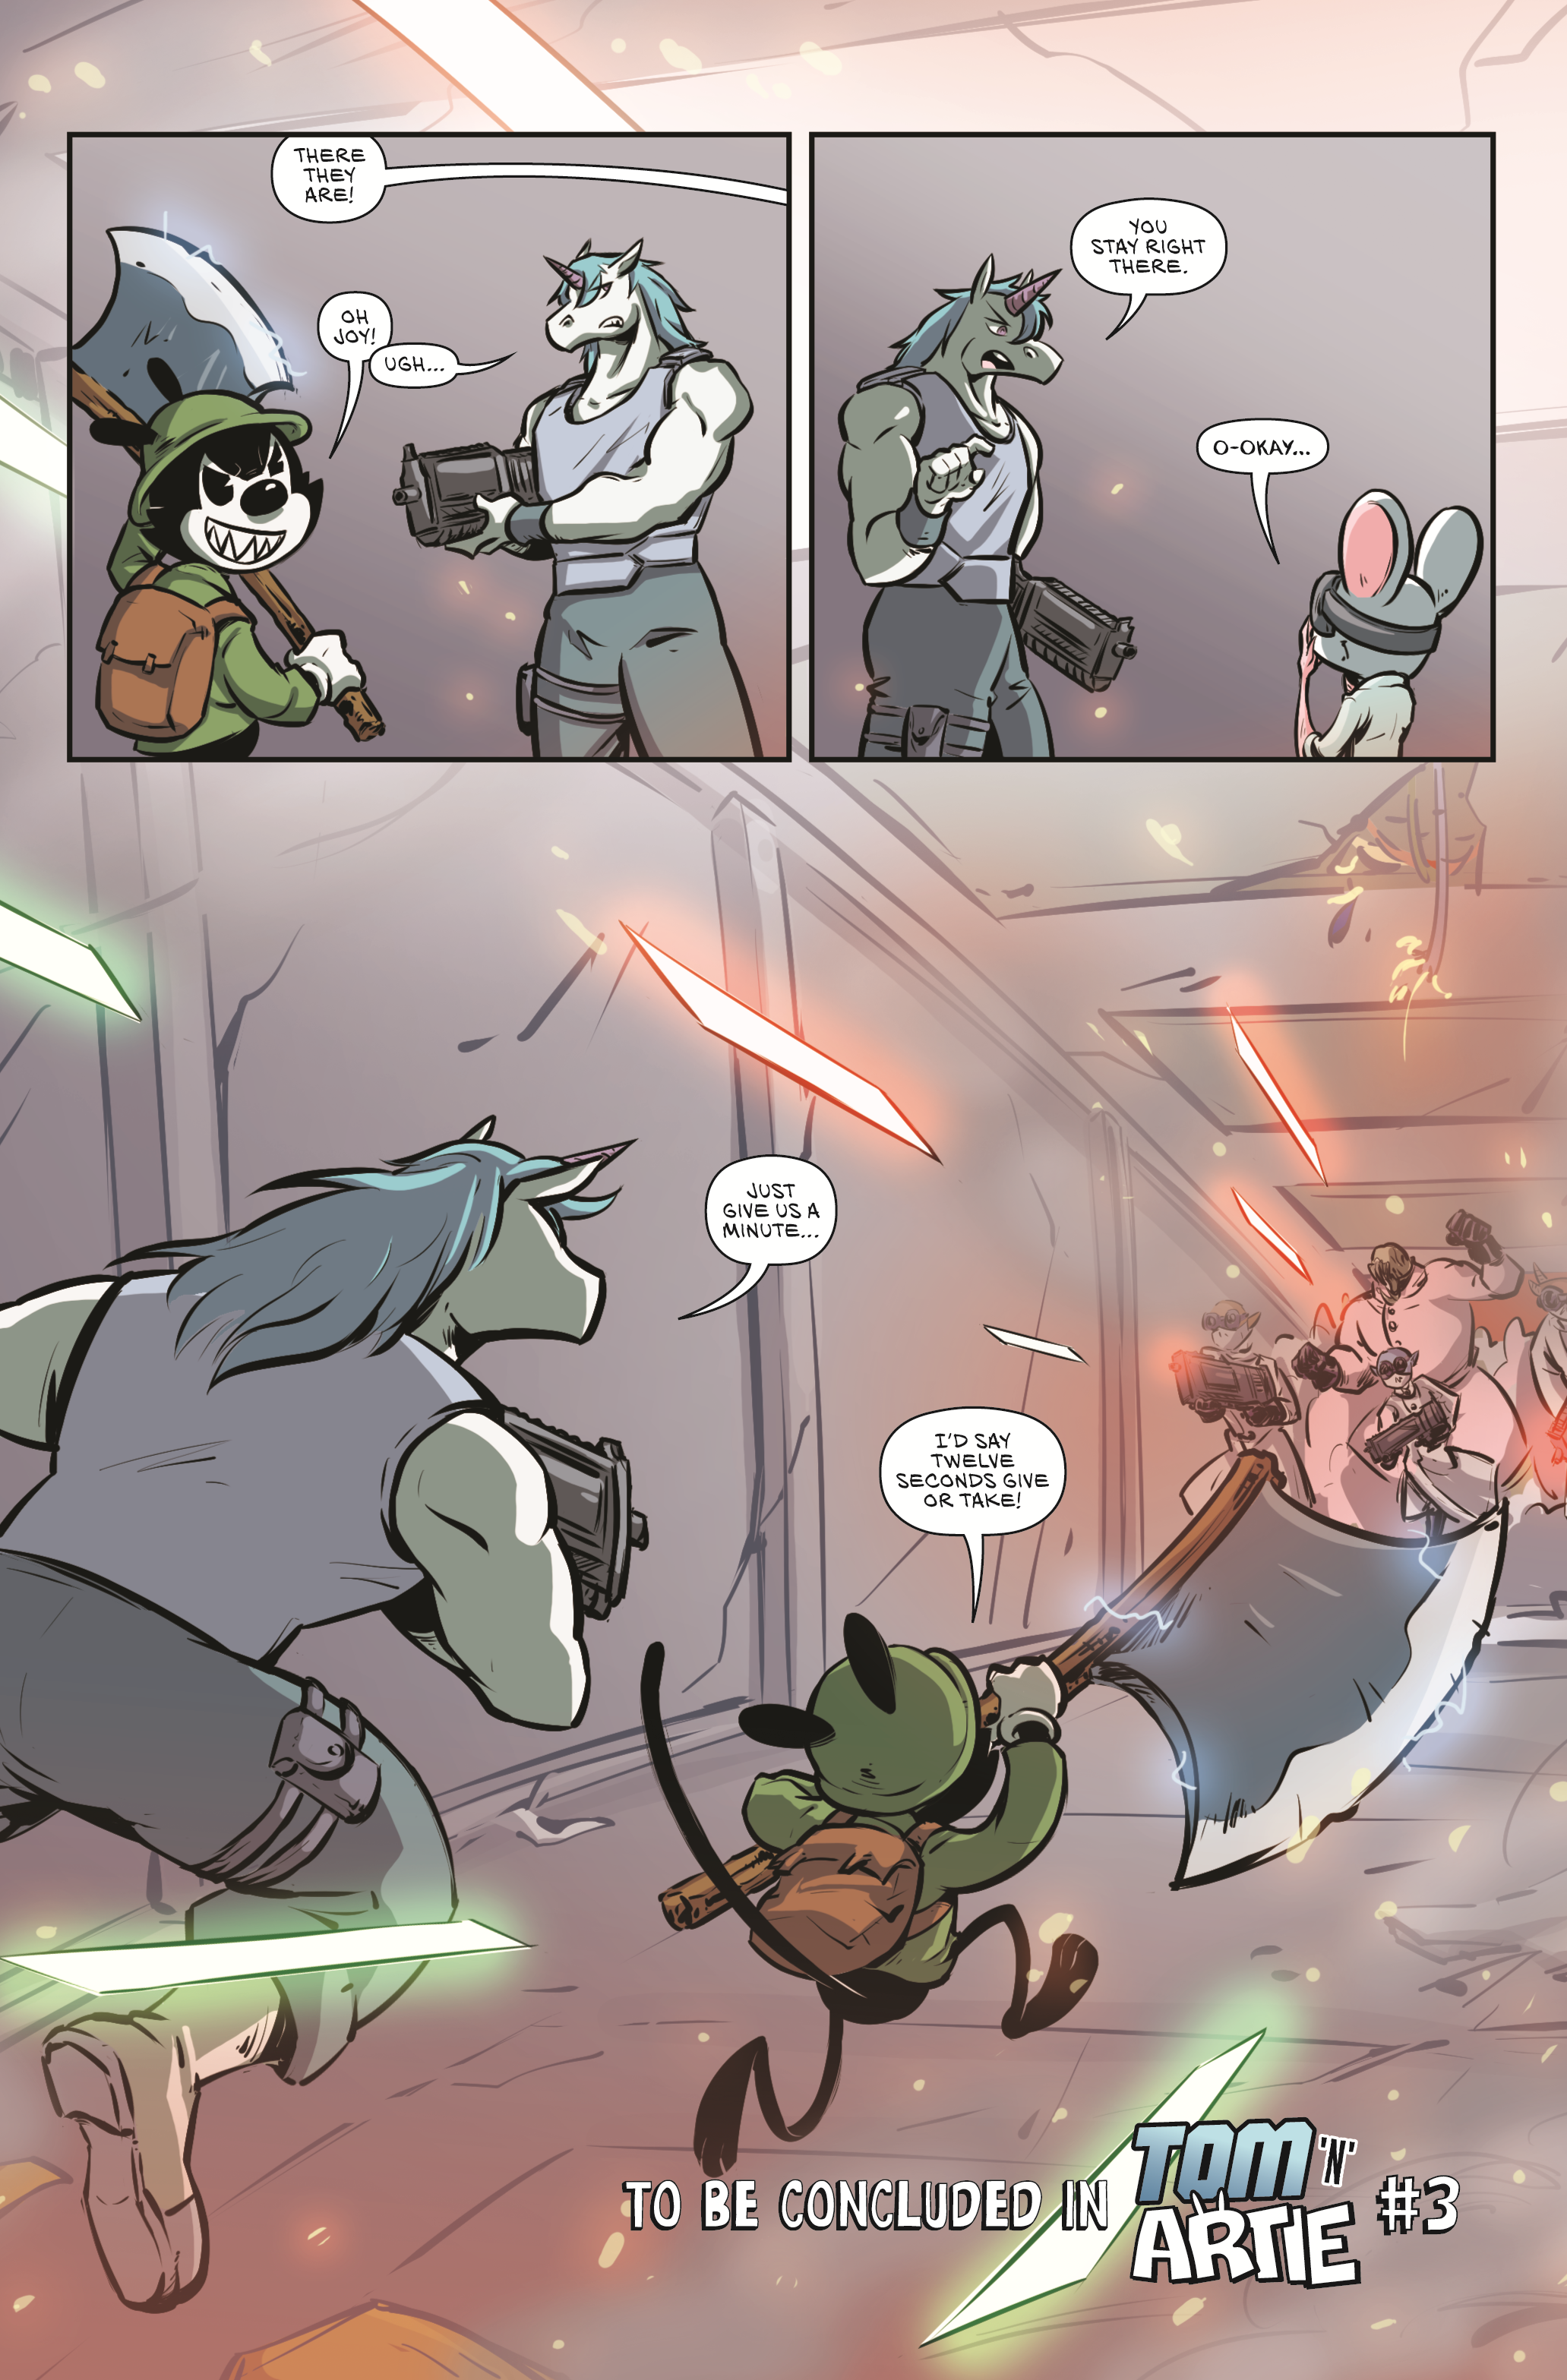 PAGE 26 – END OF ISSUE 2